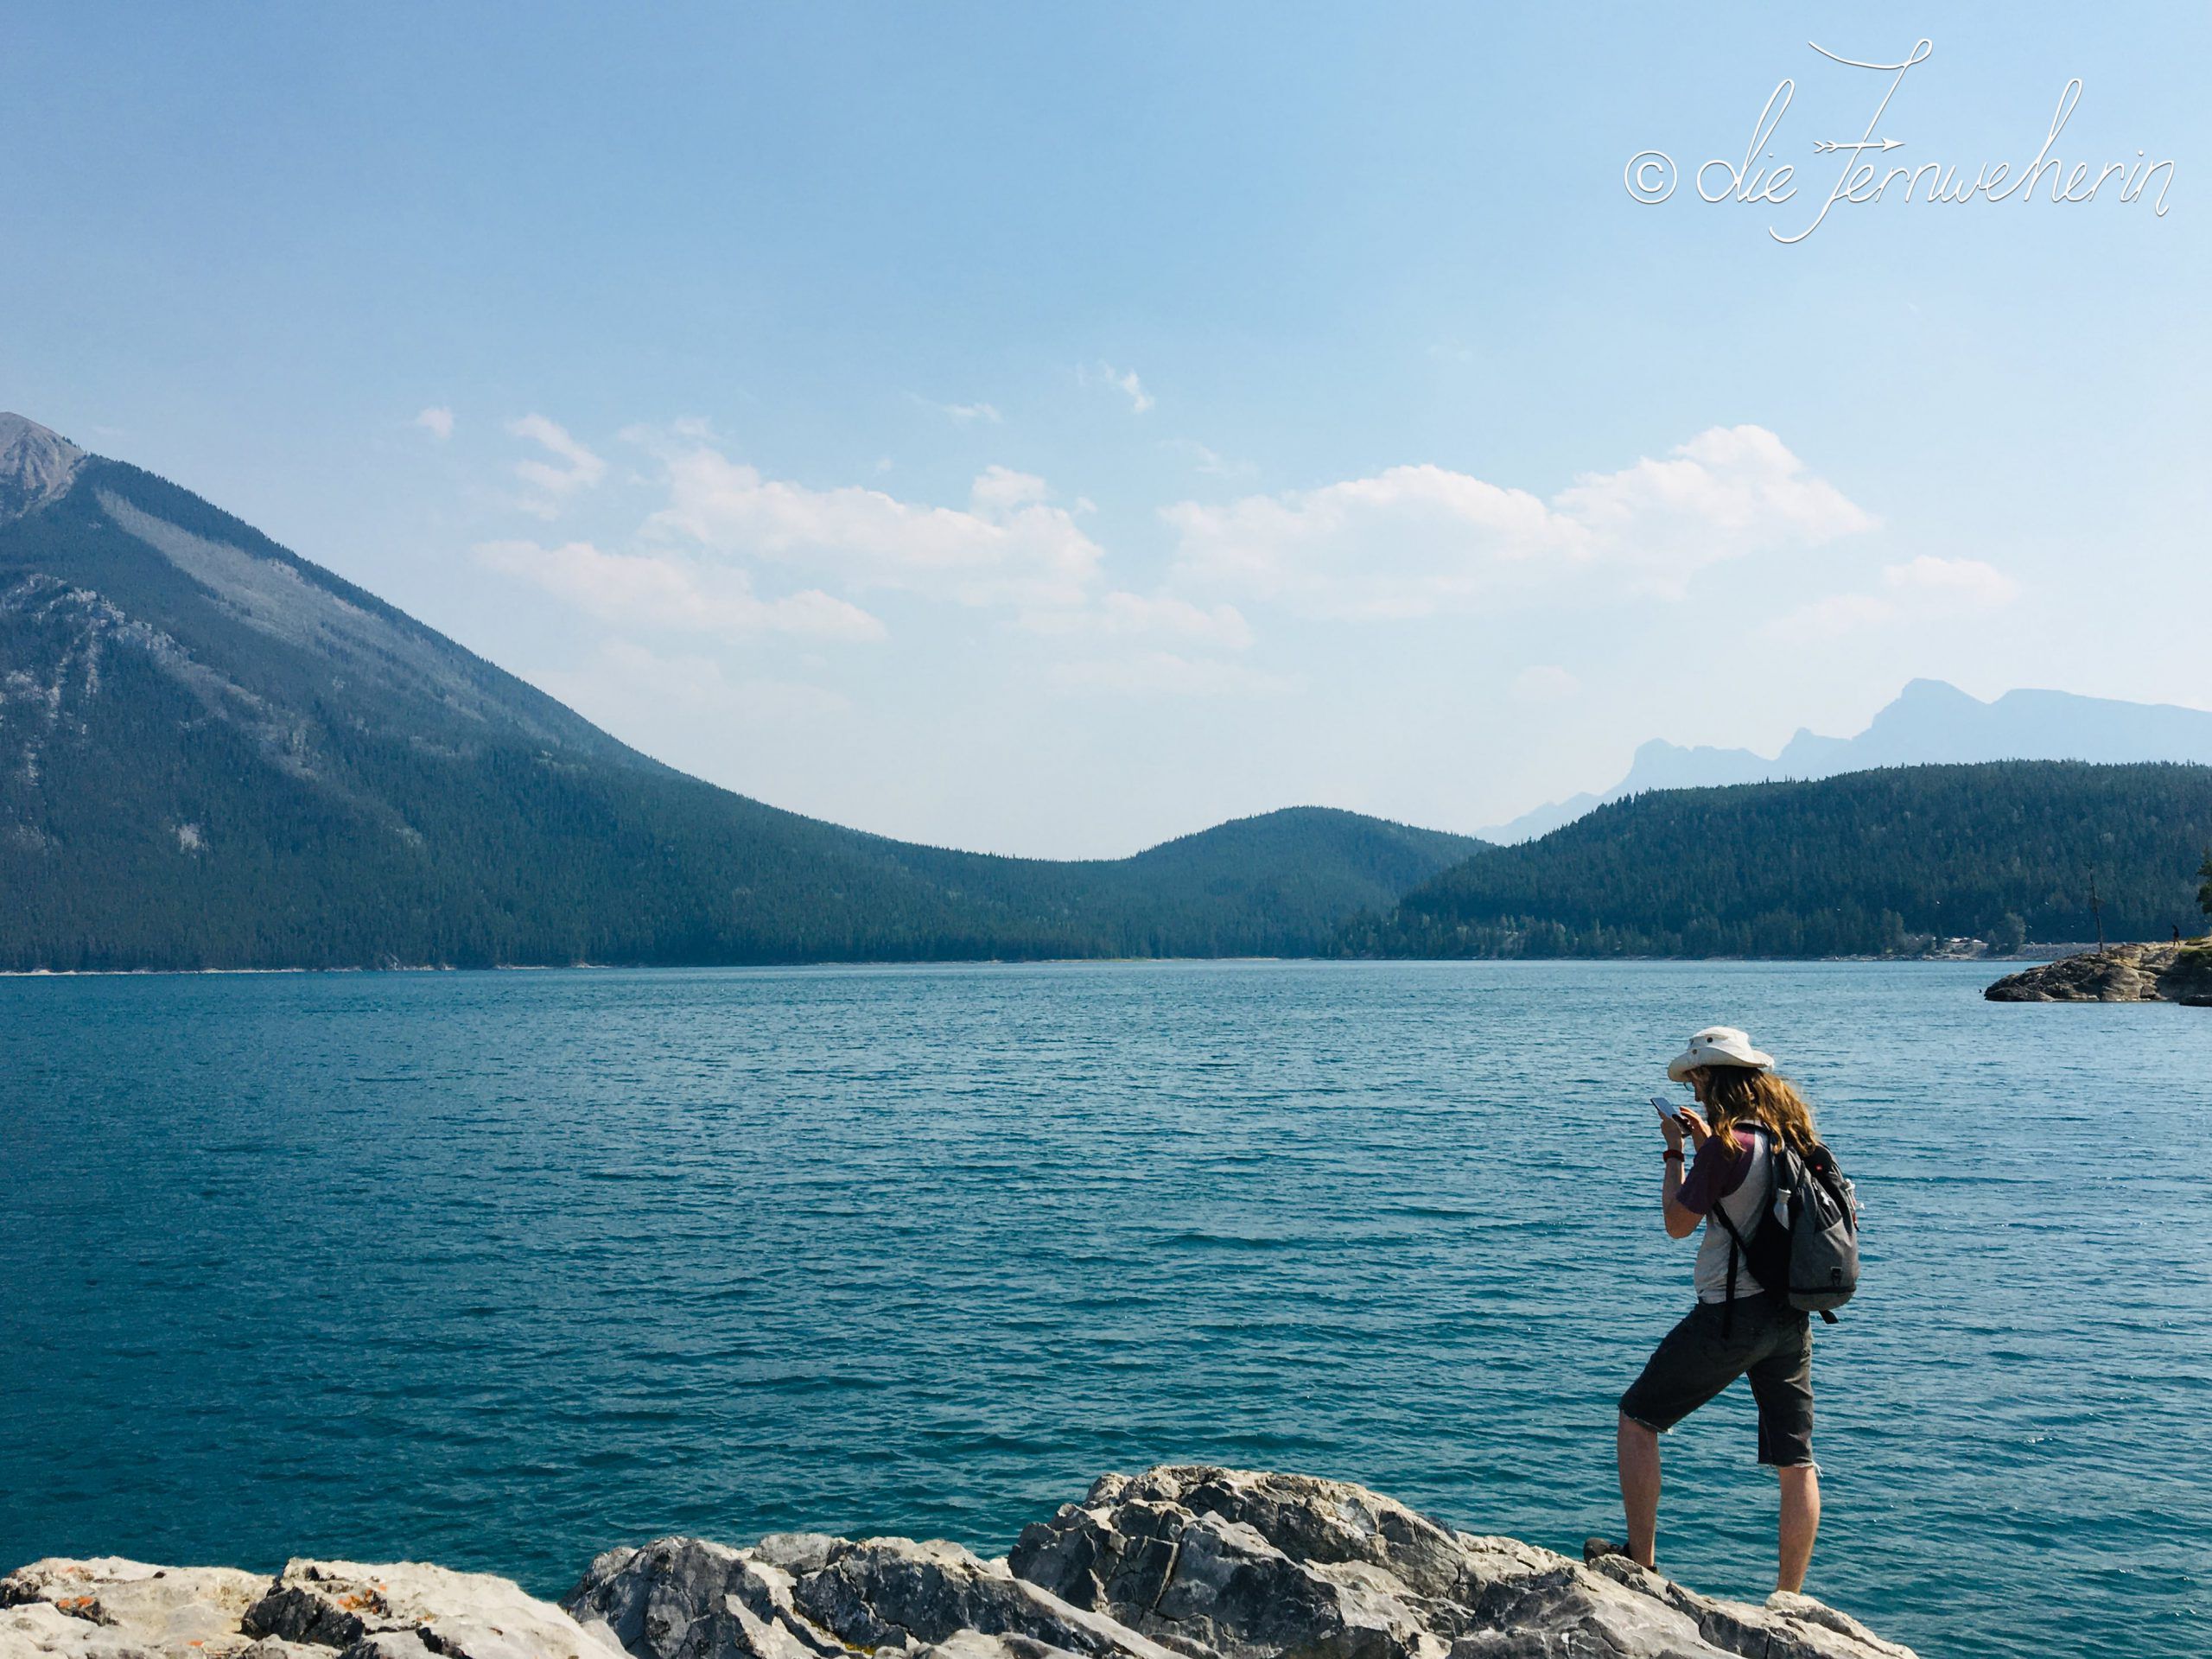 A man stands on the rocky shore around Lake Minnewanka in Banff National Park.